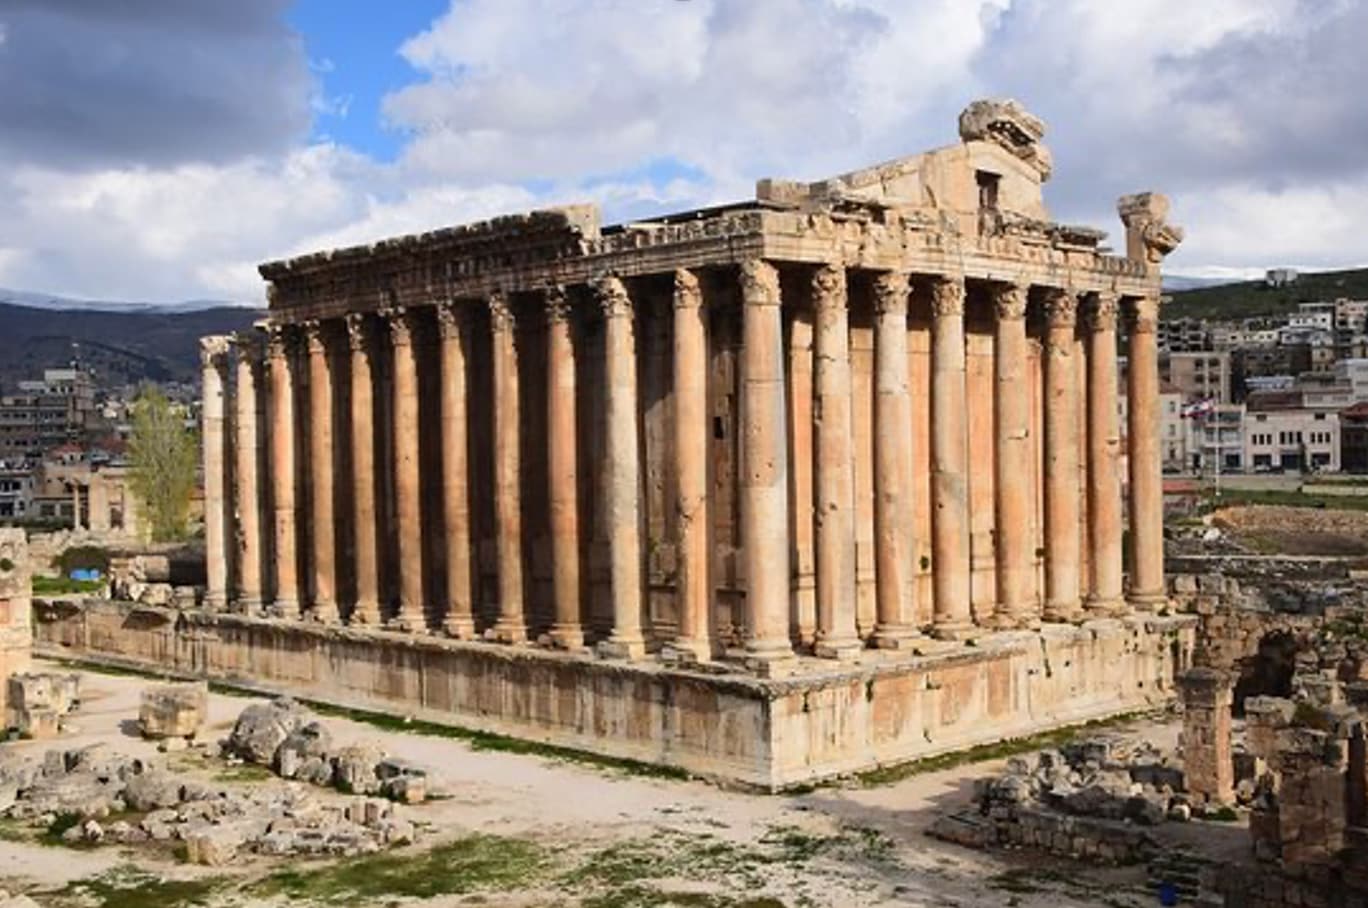 The extraordinary Temple of Bacchus at Baalbeck.